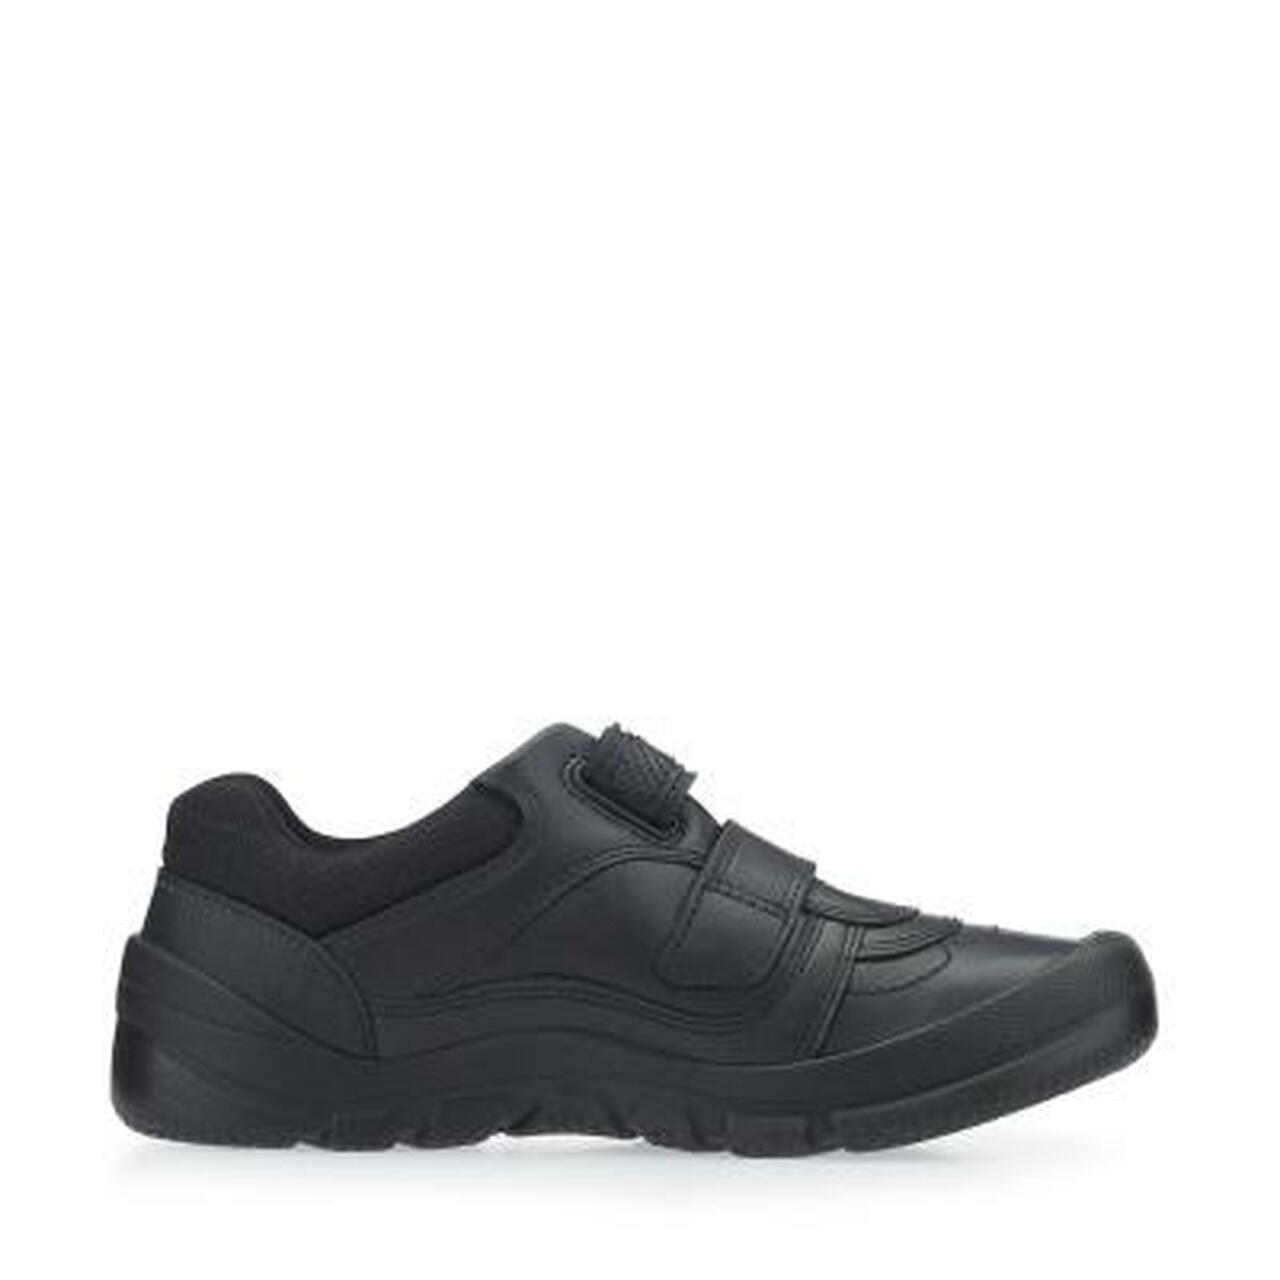 A boys school shoe by Start Rite, style Warrior, in black leather with double velcro fastening. Inner side view.